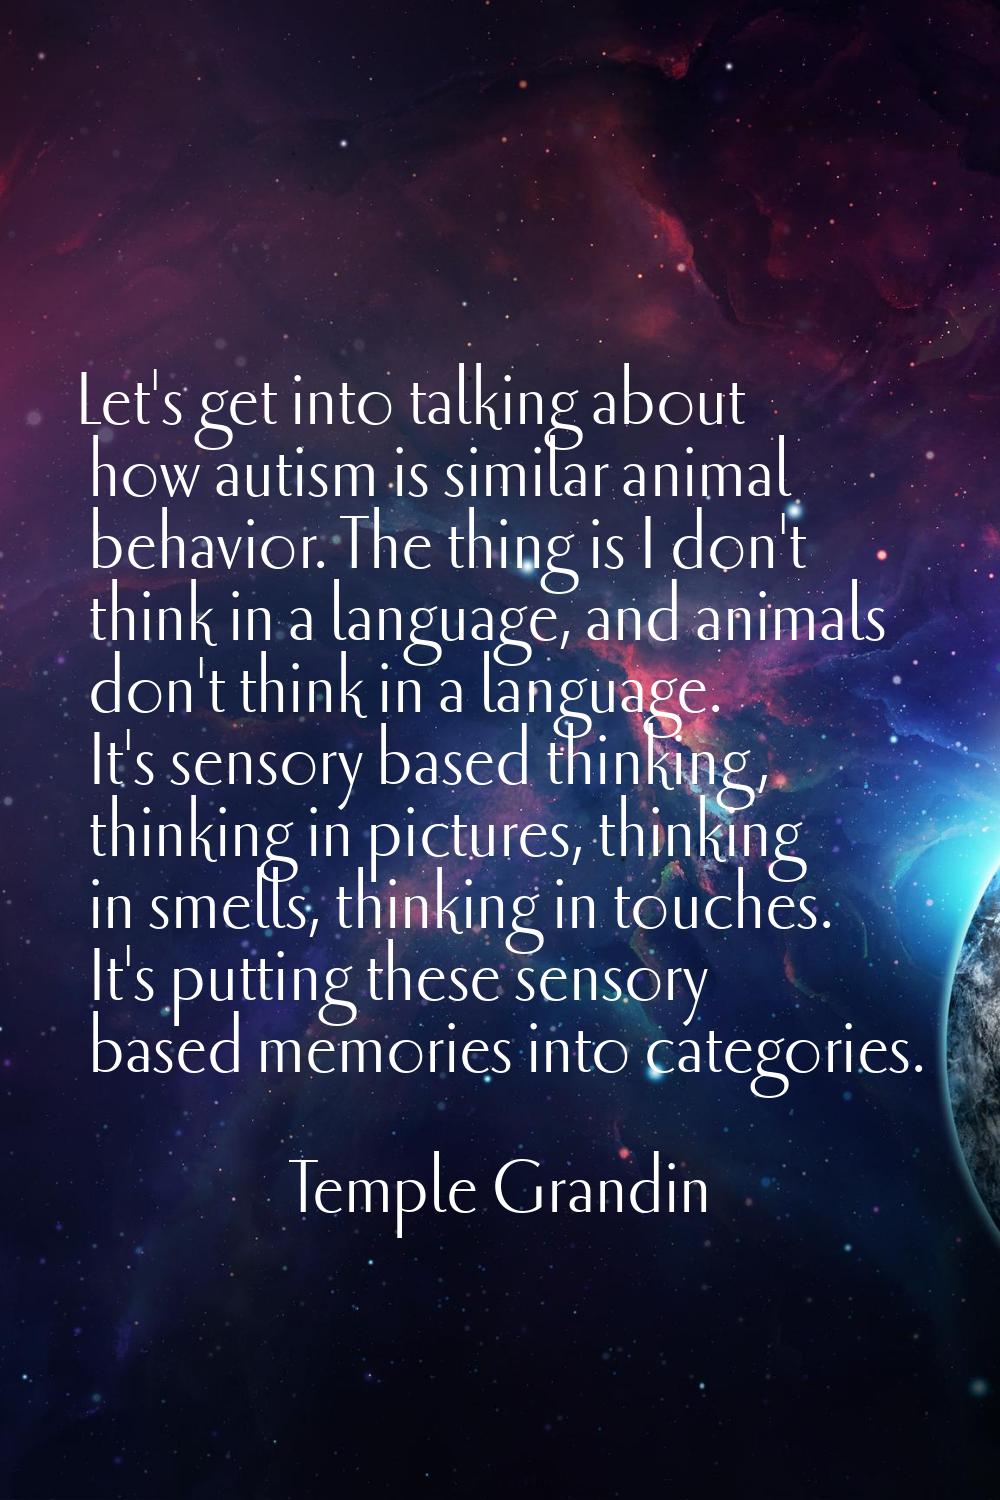 Let's get into talking about how autism is similar animal behavior. The thing is I don't think in a